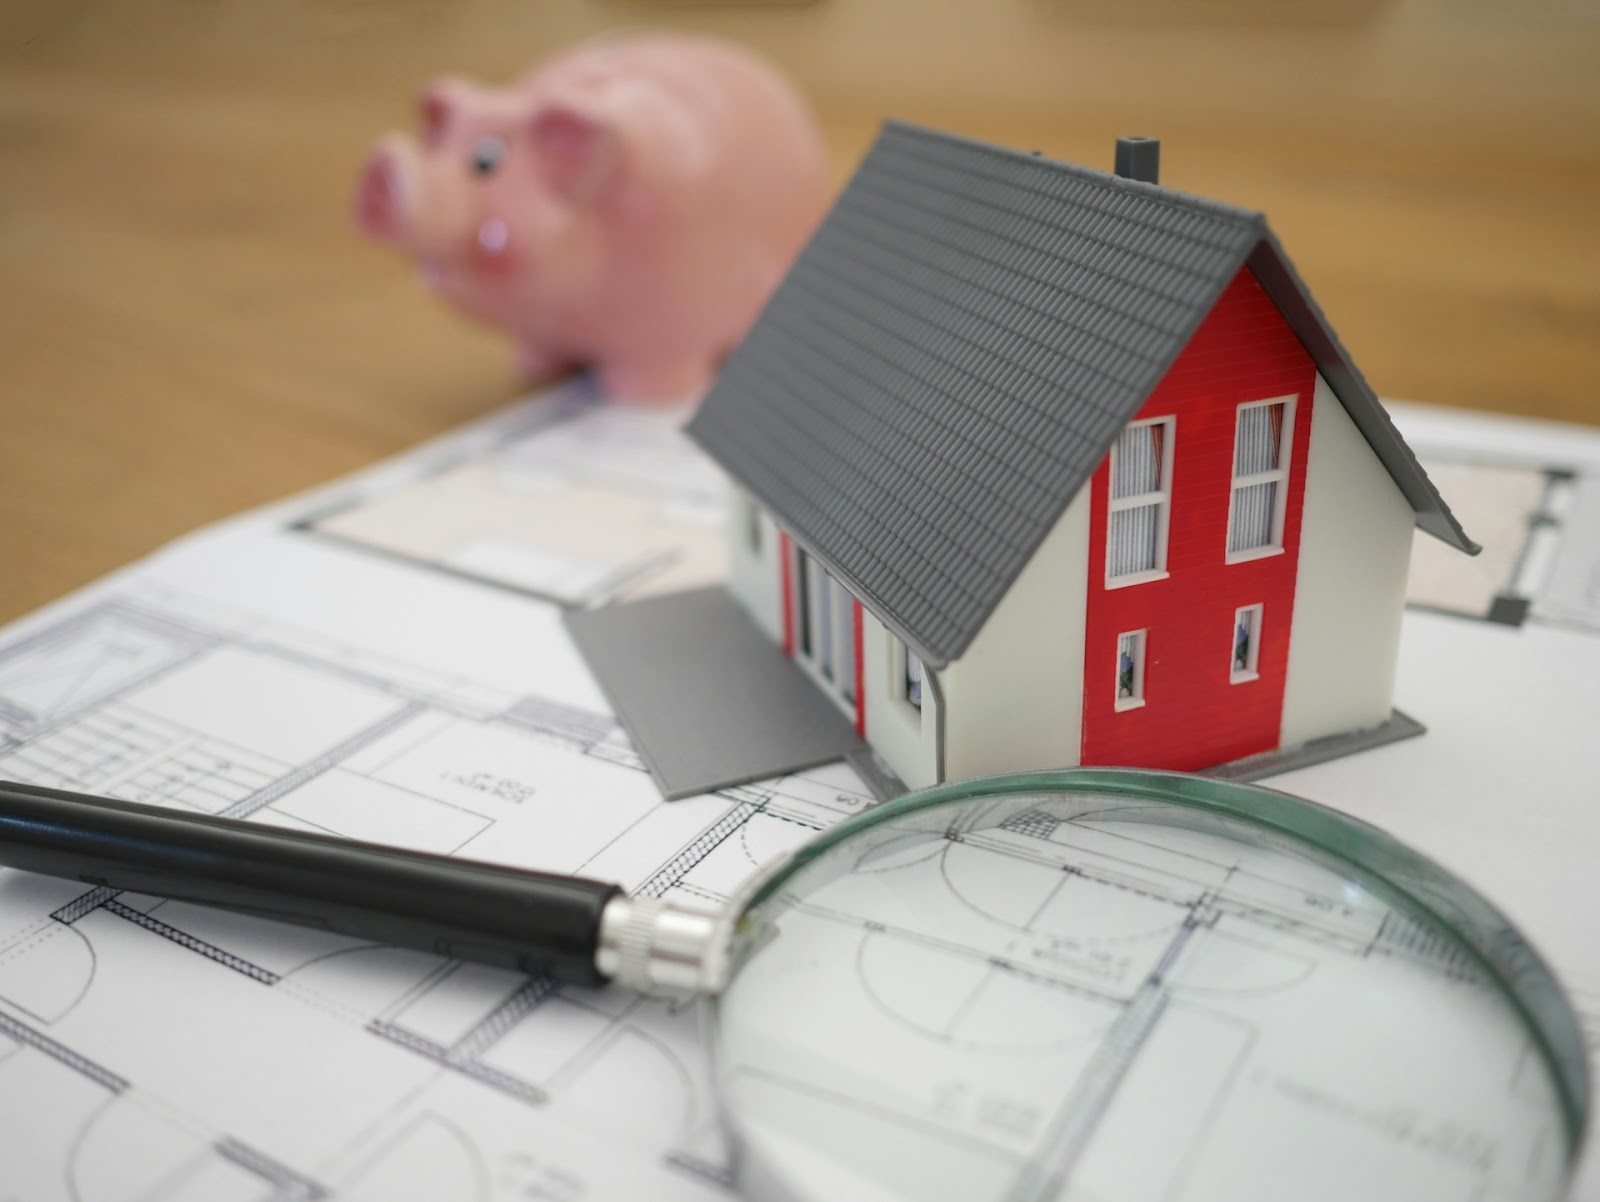 a magnifying glass, house model, and piggy bank